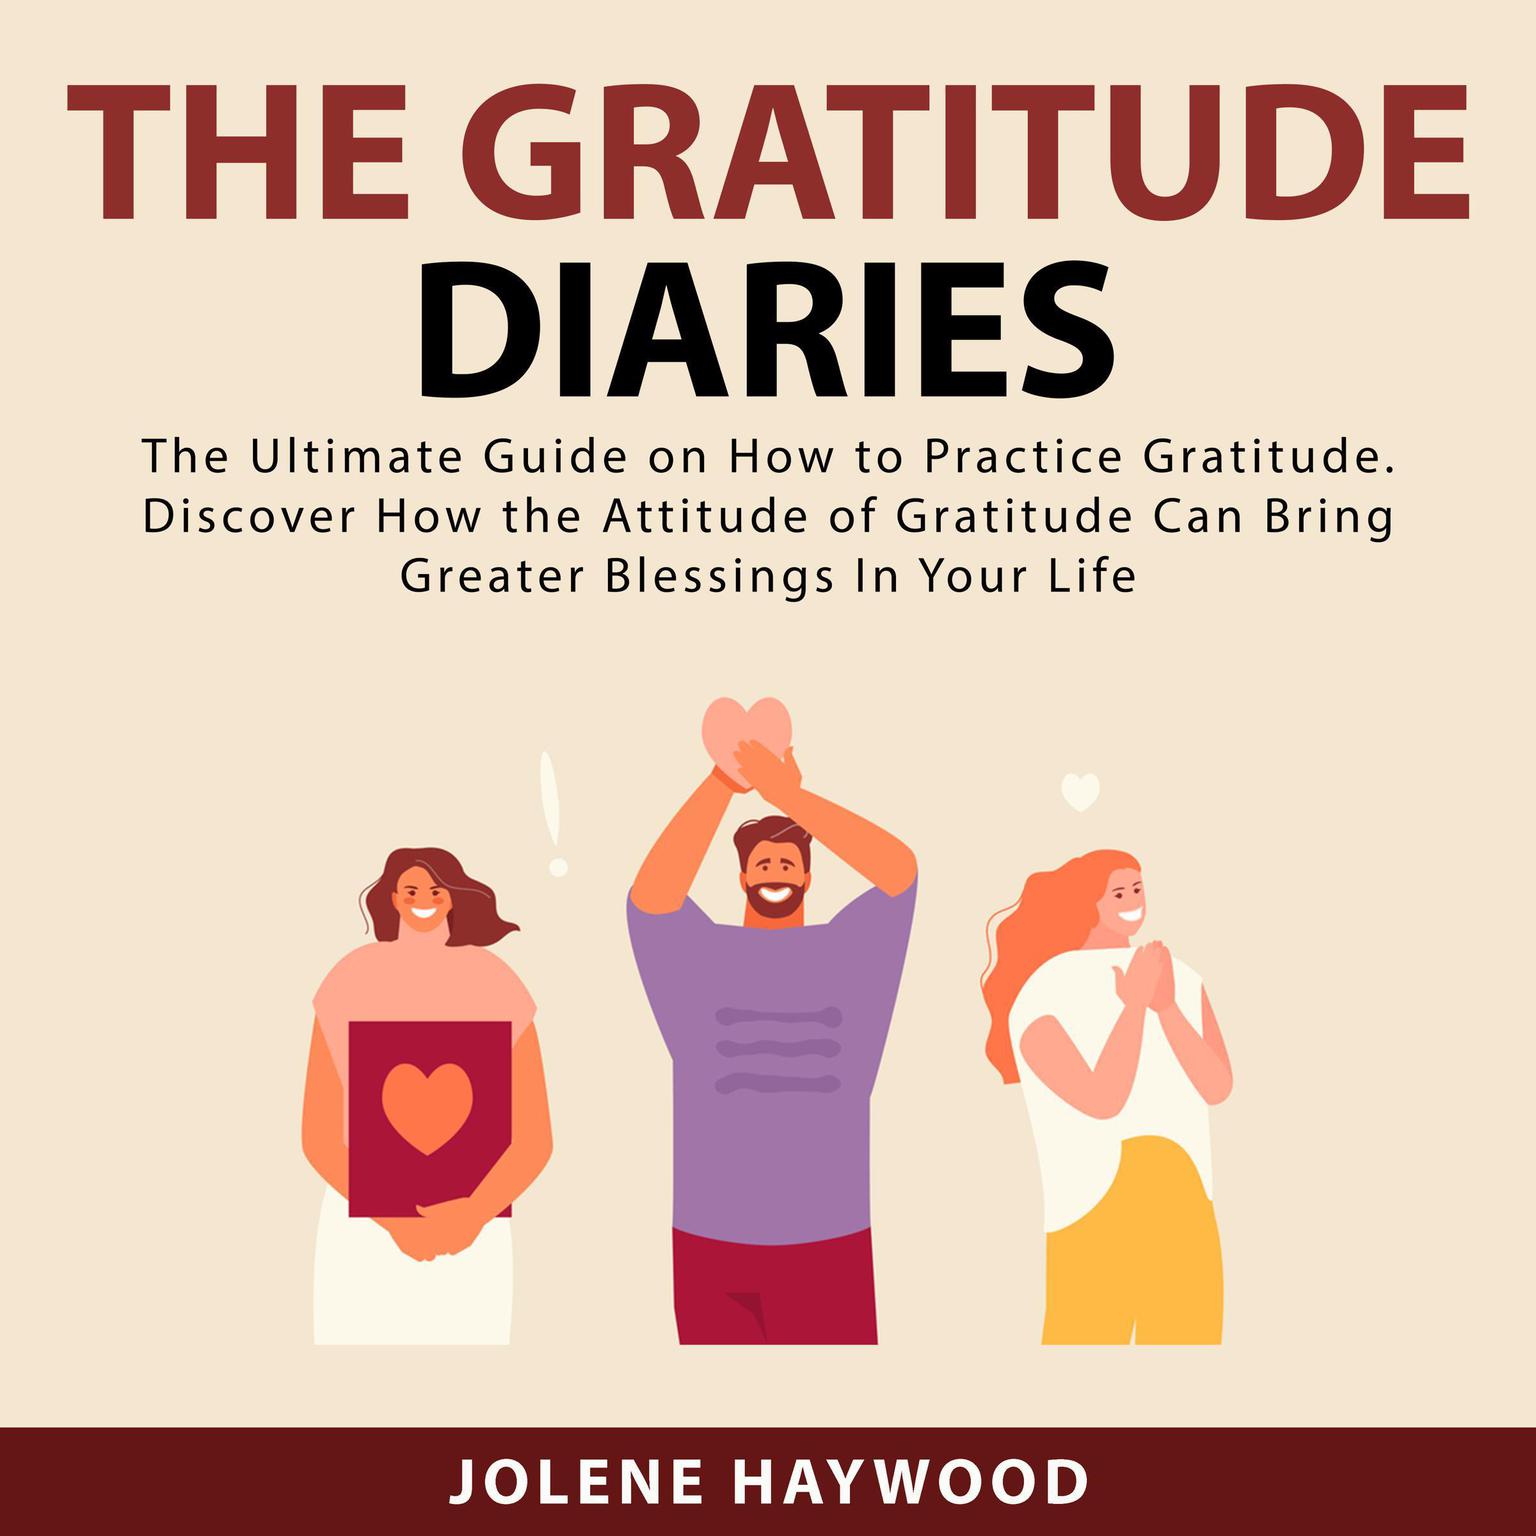 The Gratitude Diaries: The Ultimate Guide on How to Practice Gratitude. Discover How the Attitude of Gratitude Can Bring Greater Blessings In Your Life Audiobook, by Jolene Haywood